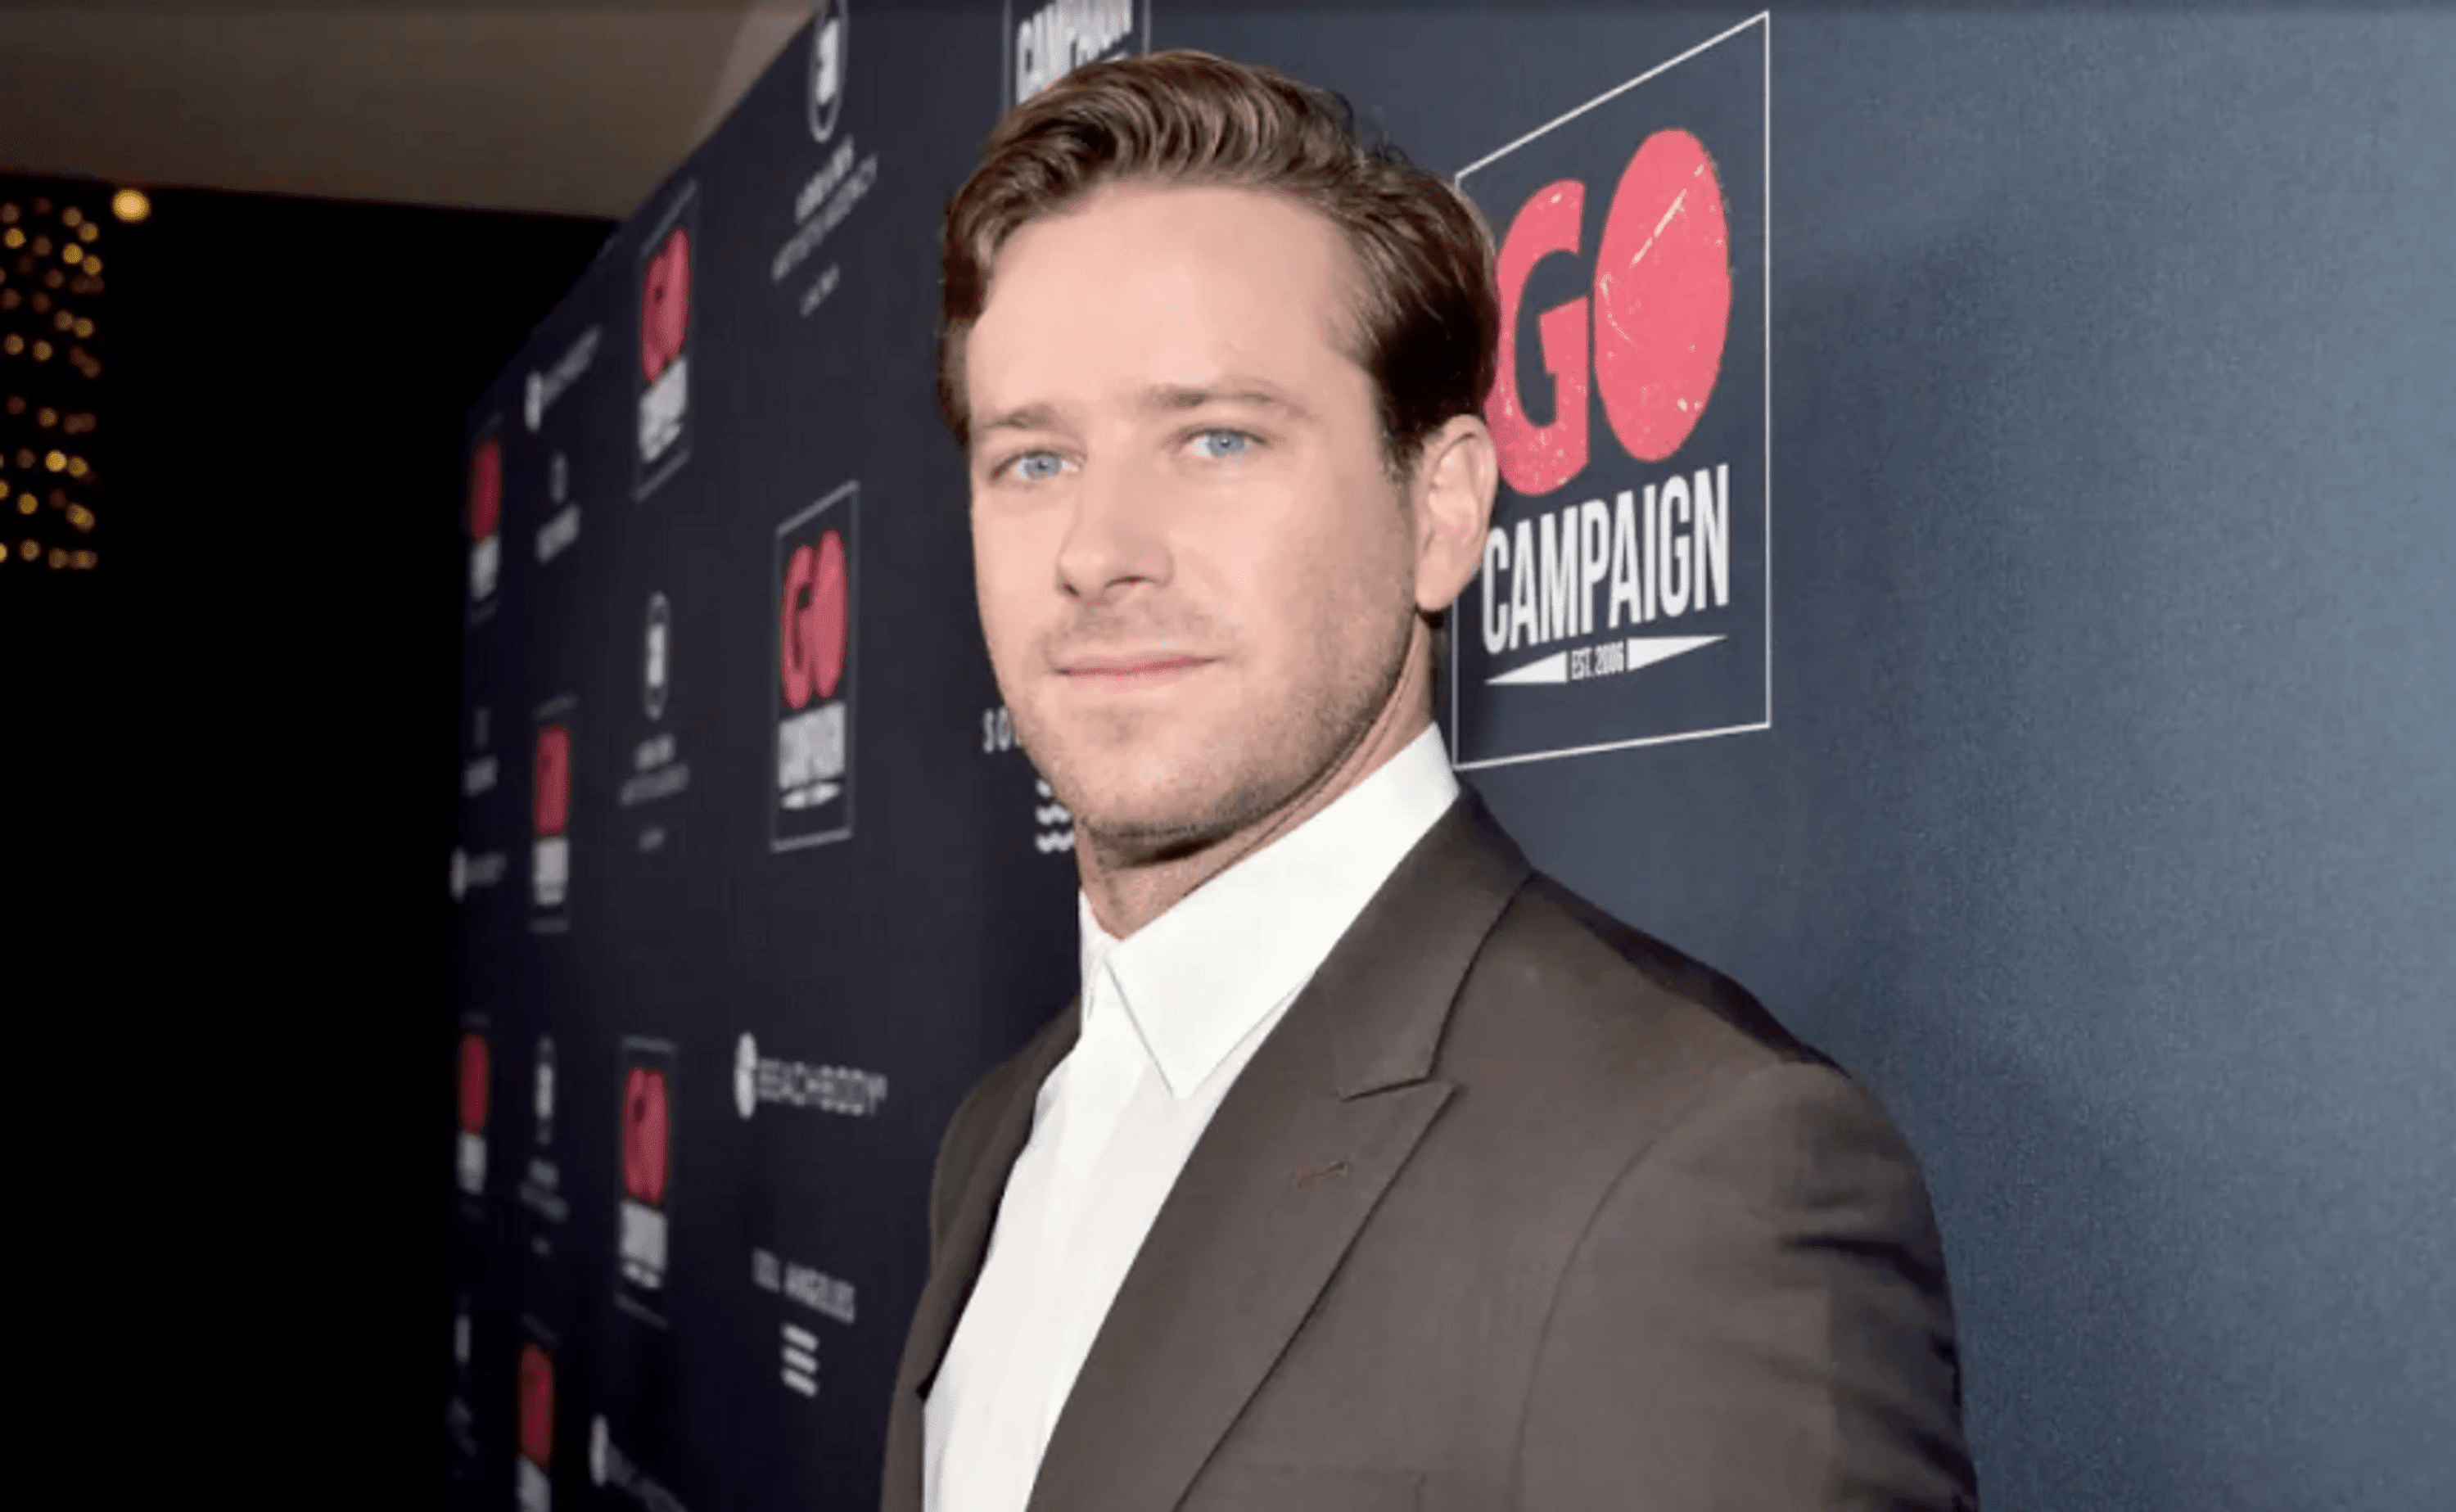 About being accused of cannibalism, Armie Hammer will shoot a TV series